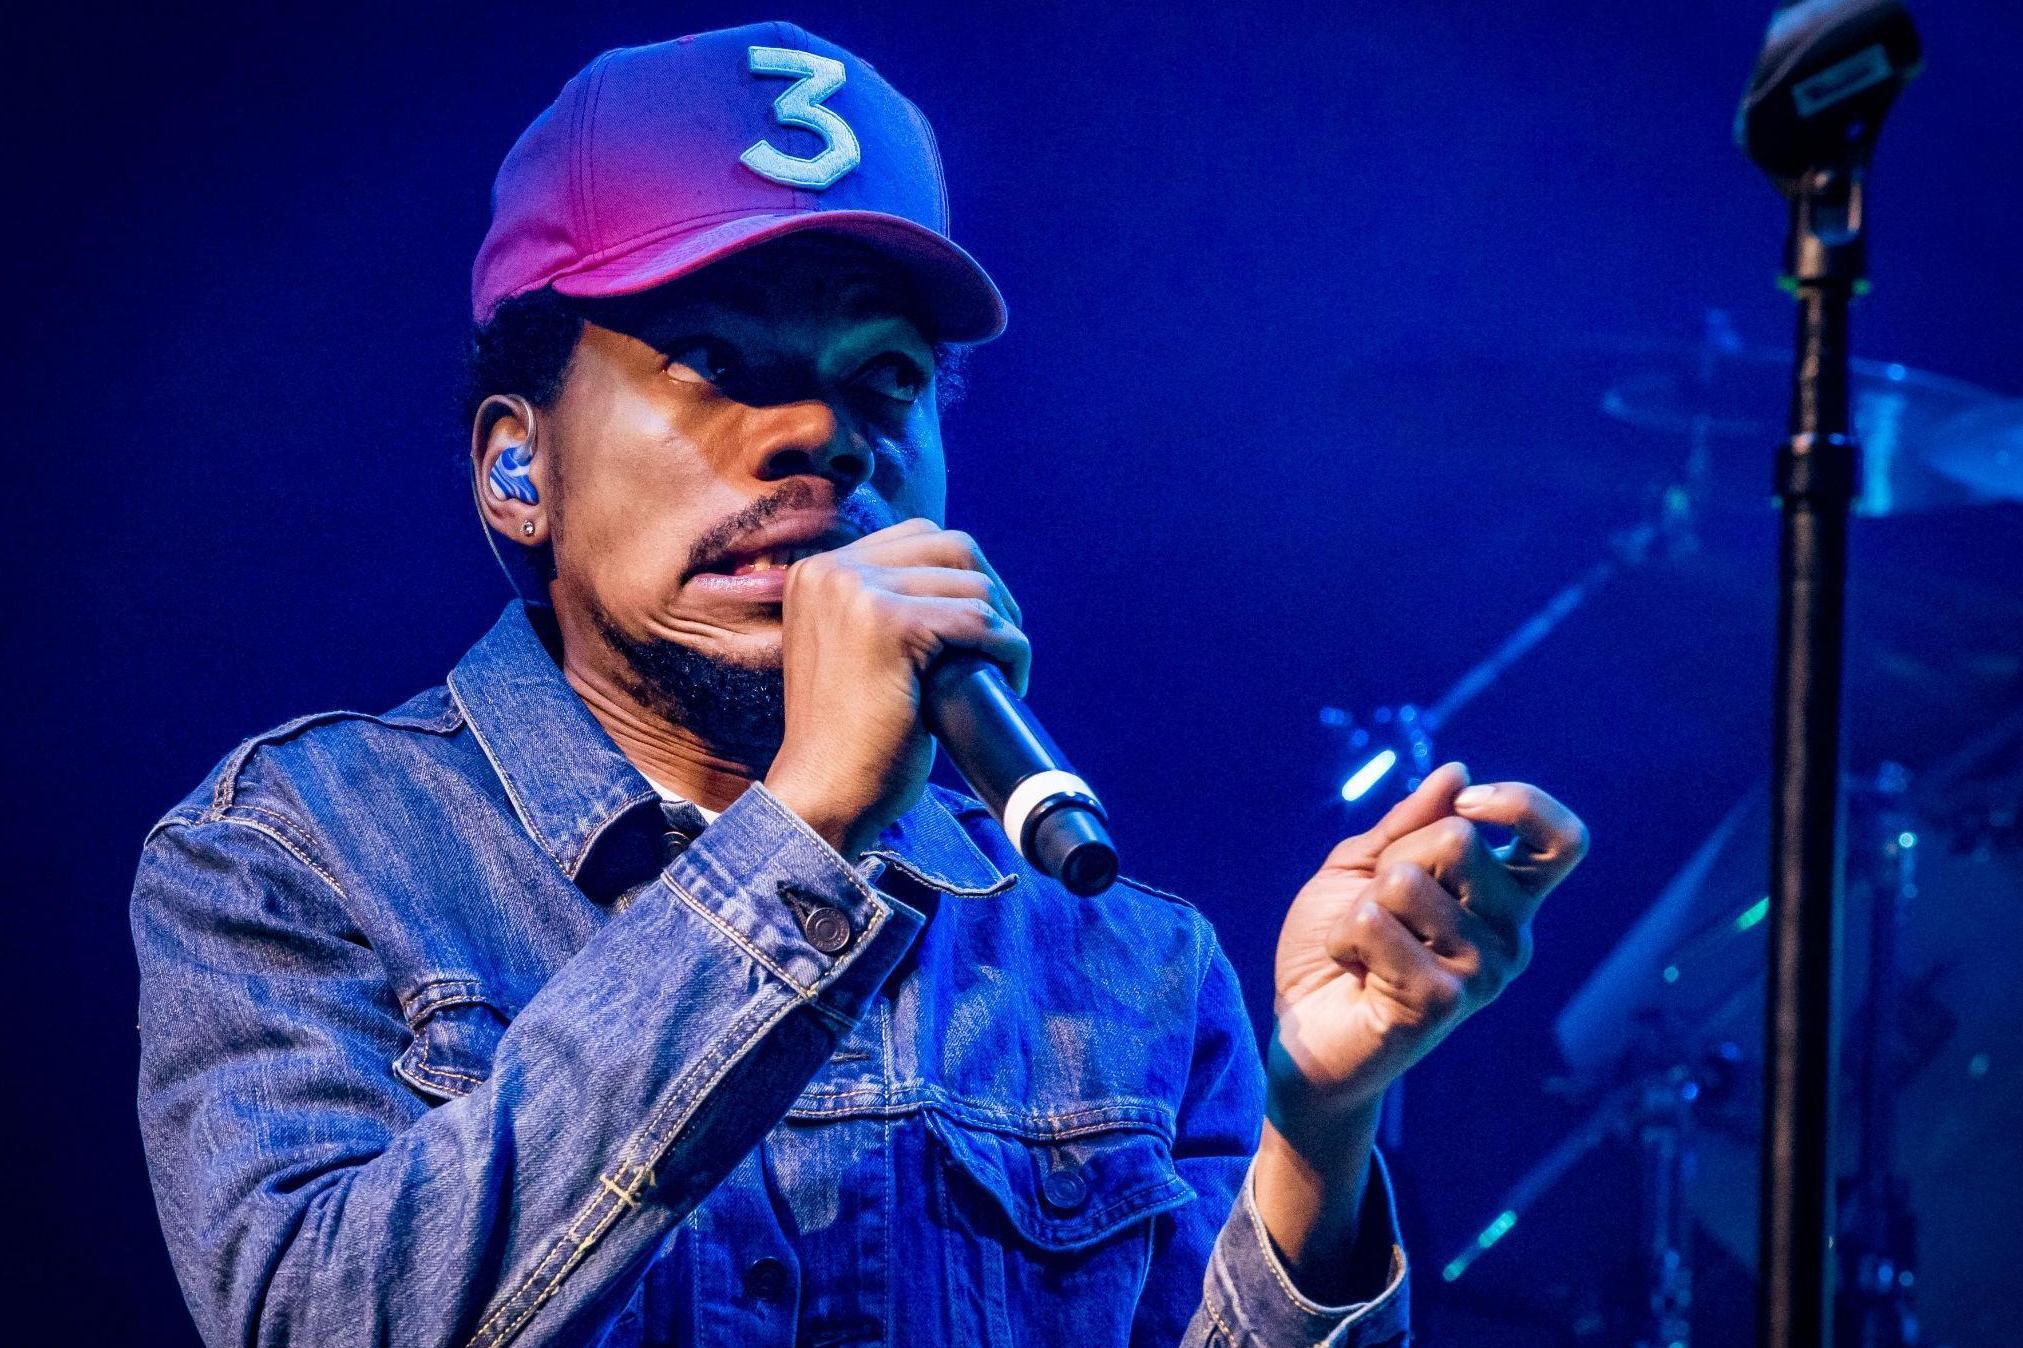 Chance the Rapper helped to give Donald Trump his biggest Twitter moment of the night